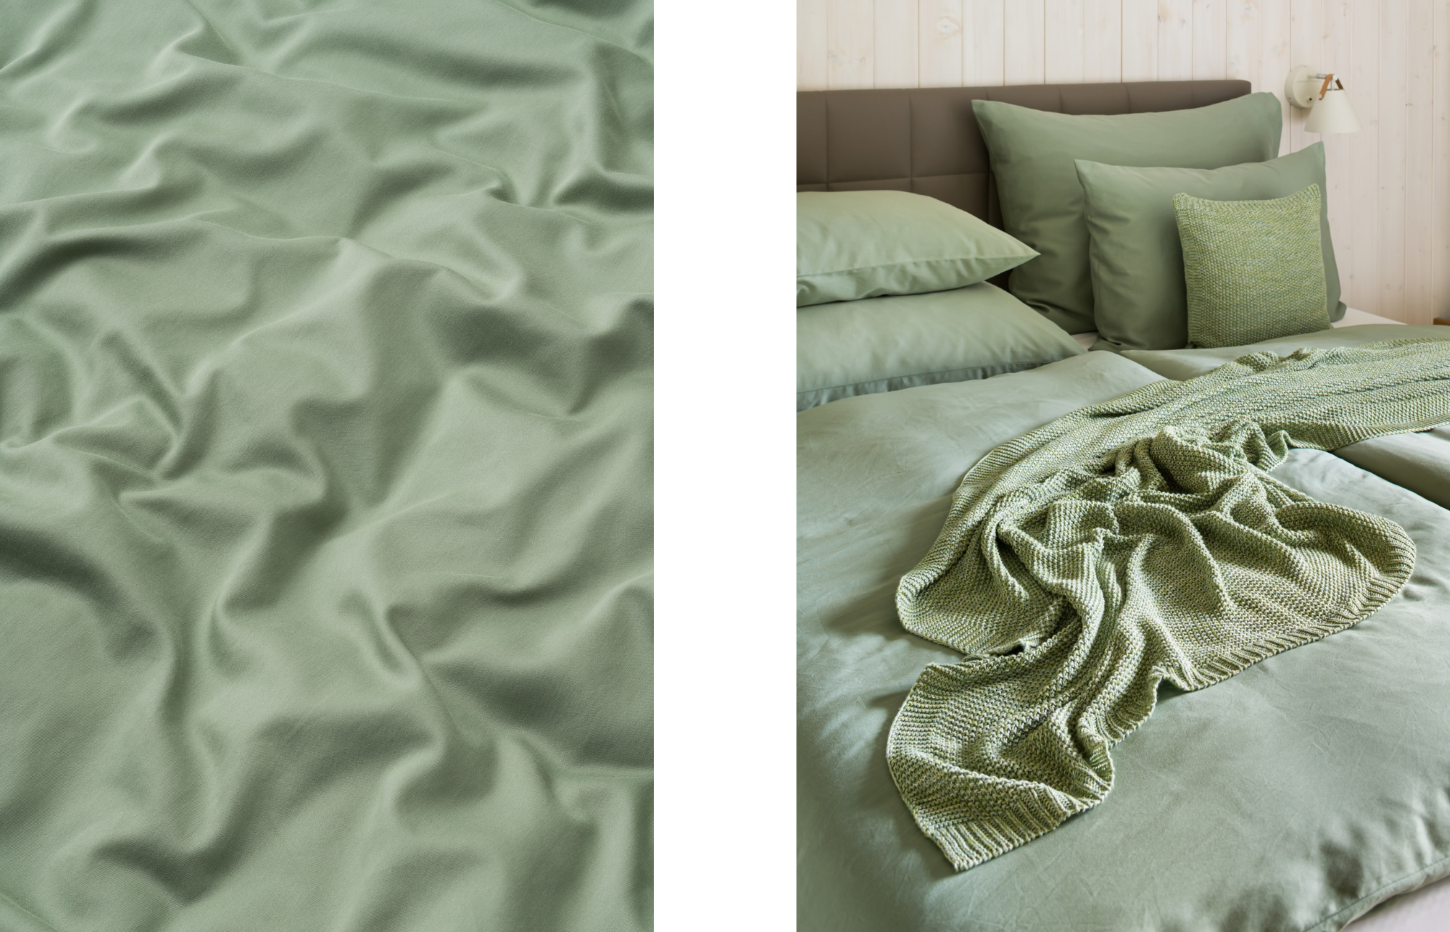 Enjoy a colourful summer! Picking new bed linen shades is the way to go!